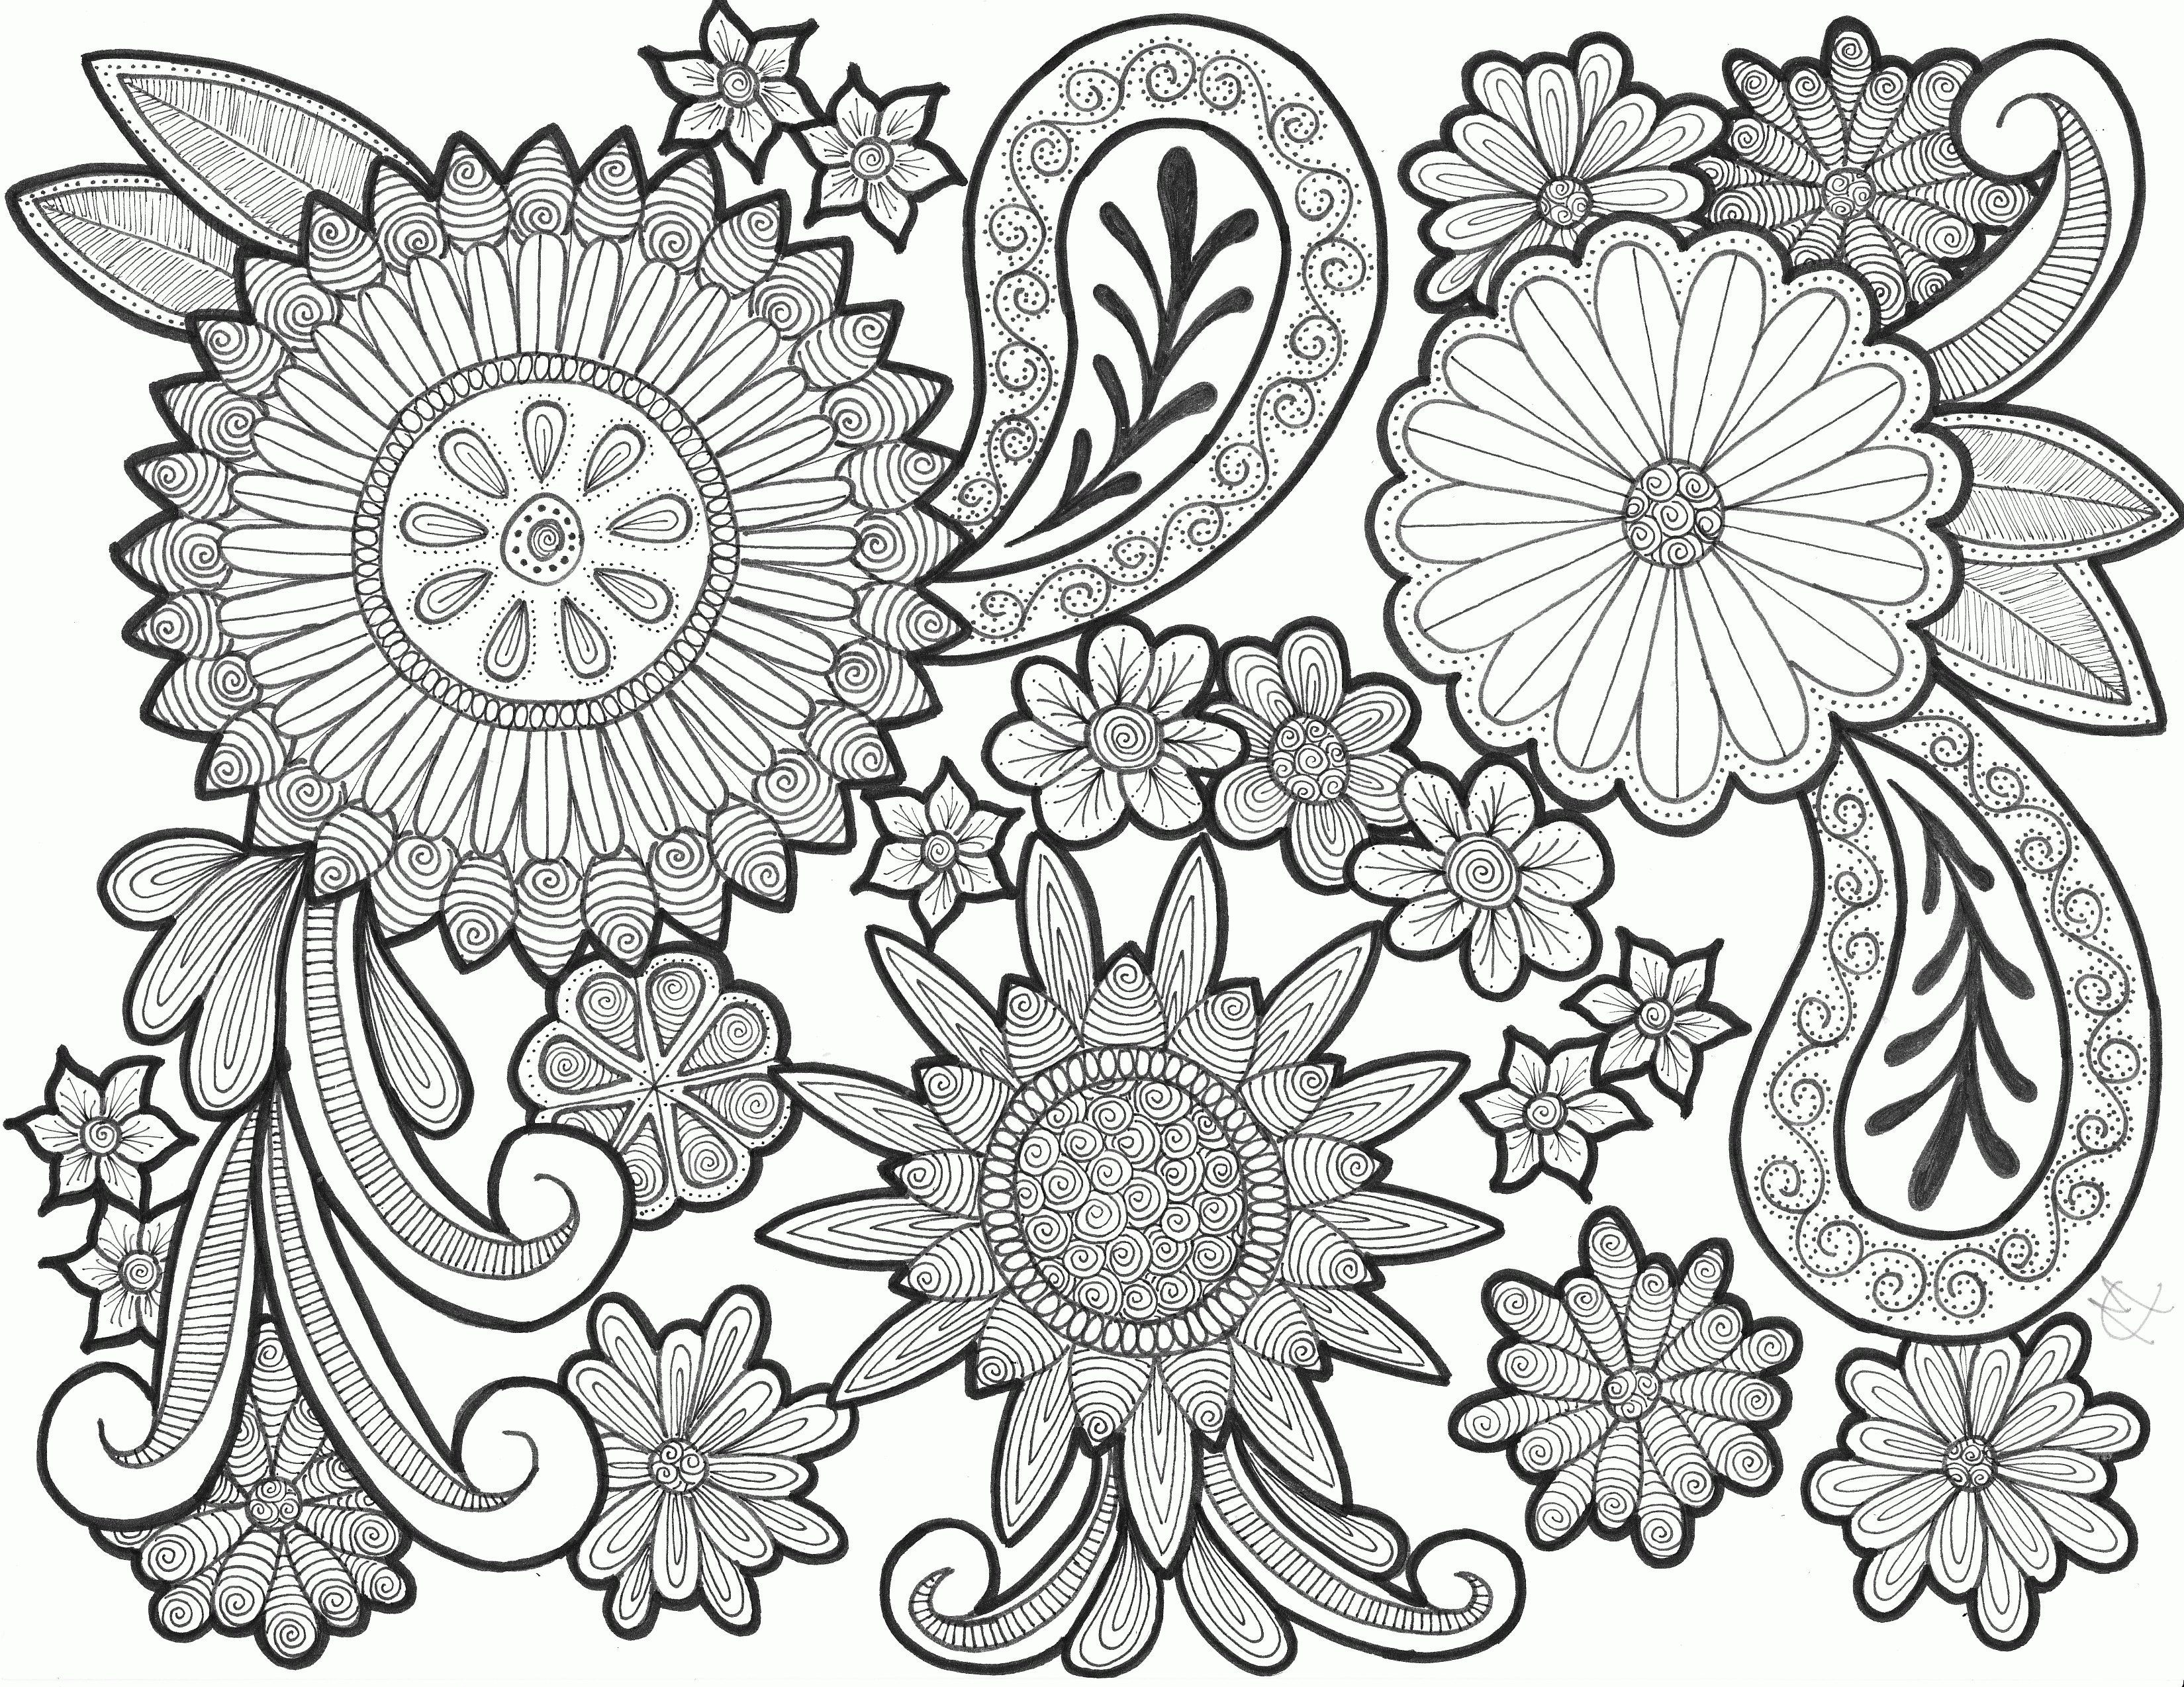 Paisley Coloring Pages Free Printable - Coloring Home